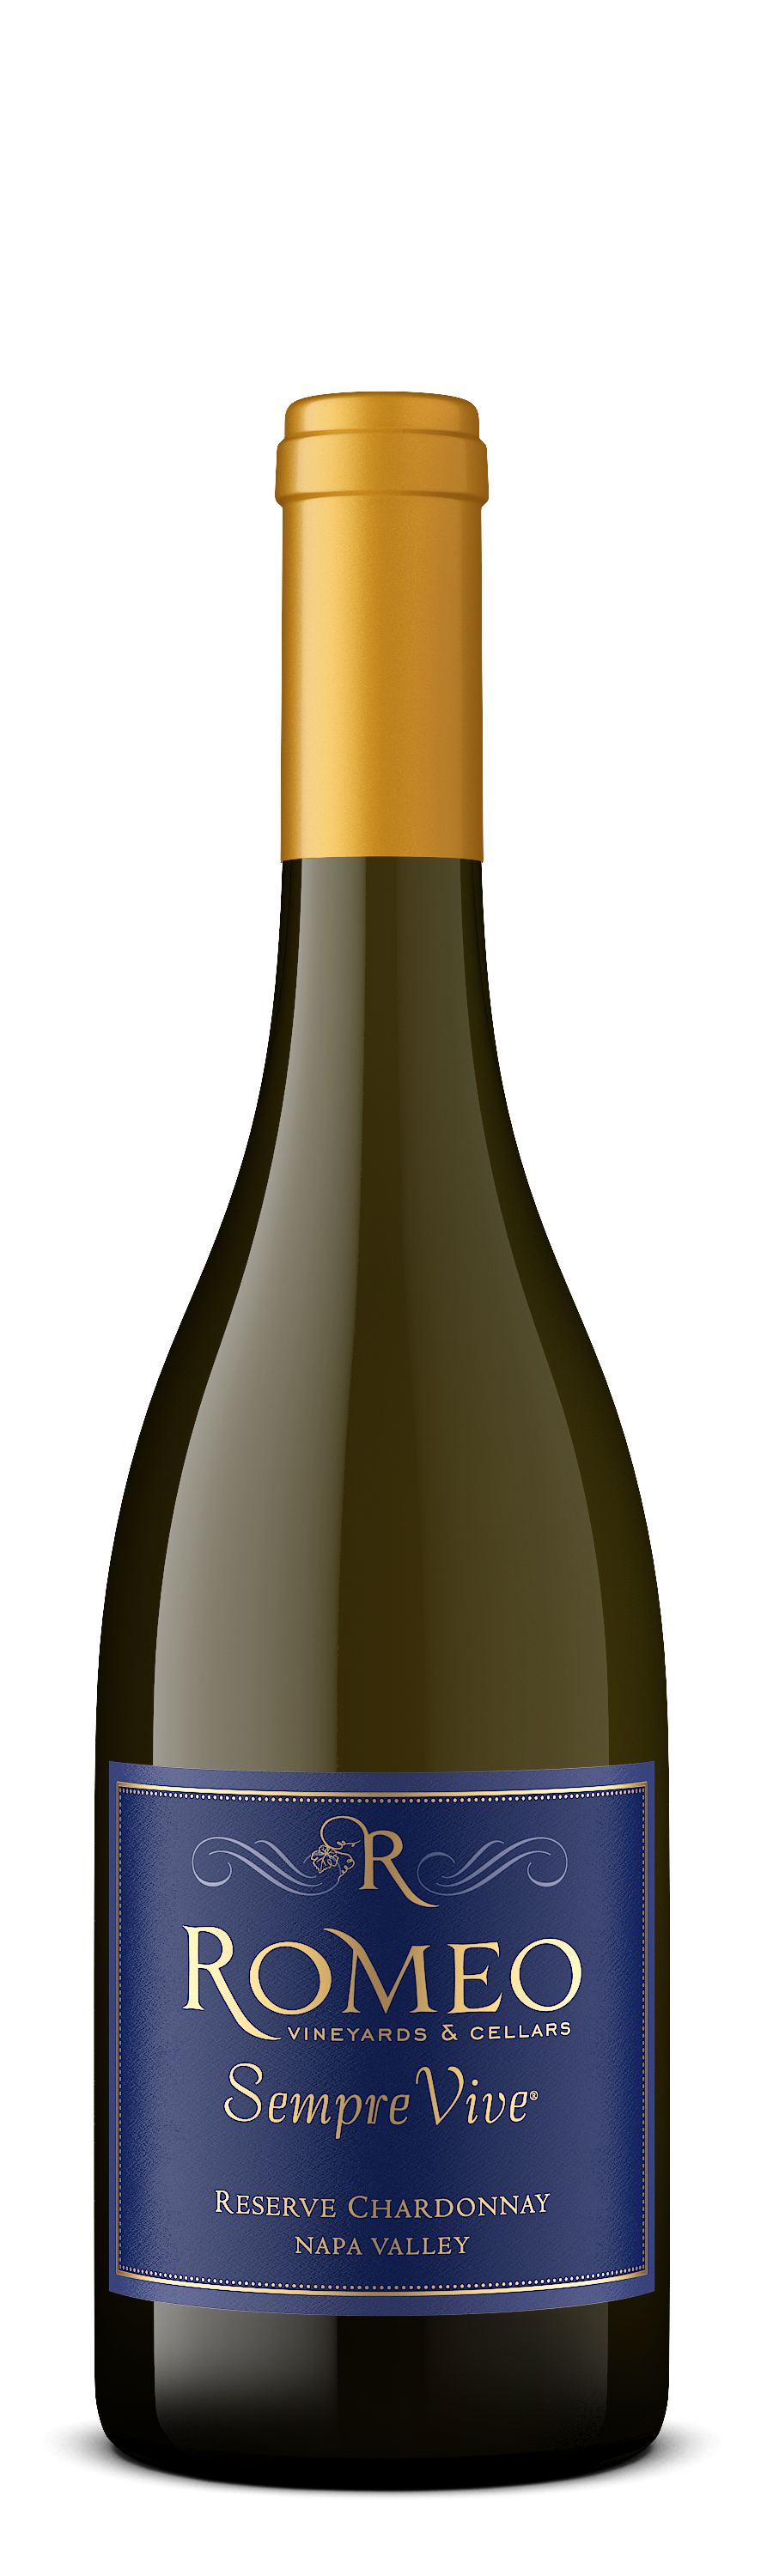 Product Image for 2021 Chardonnay Reserve